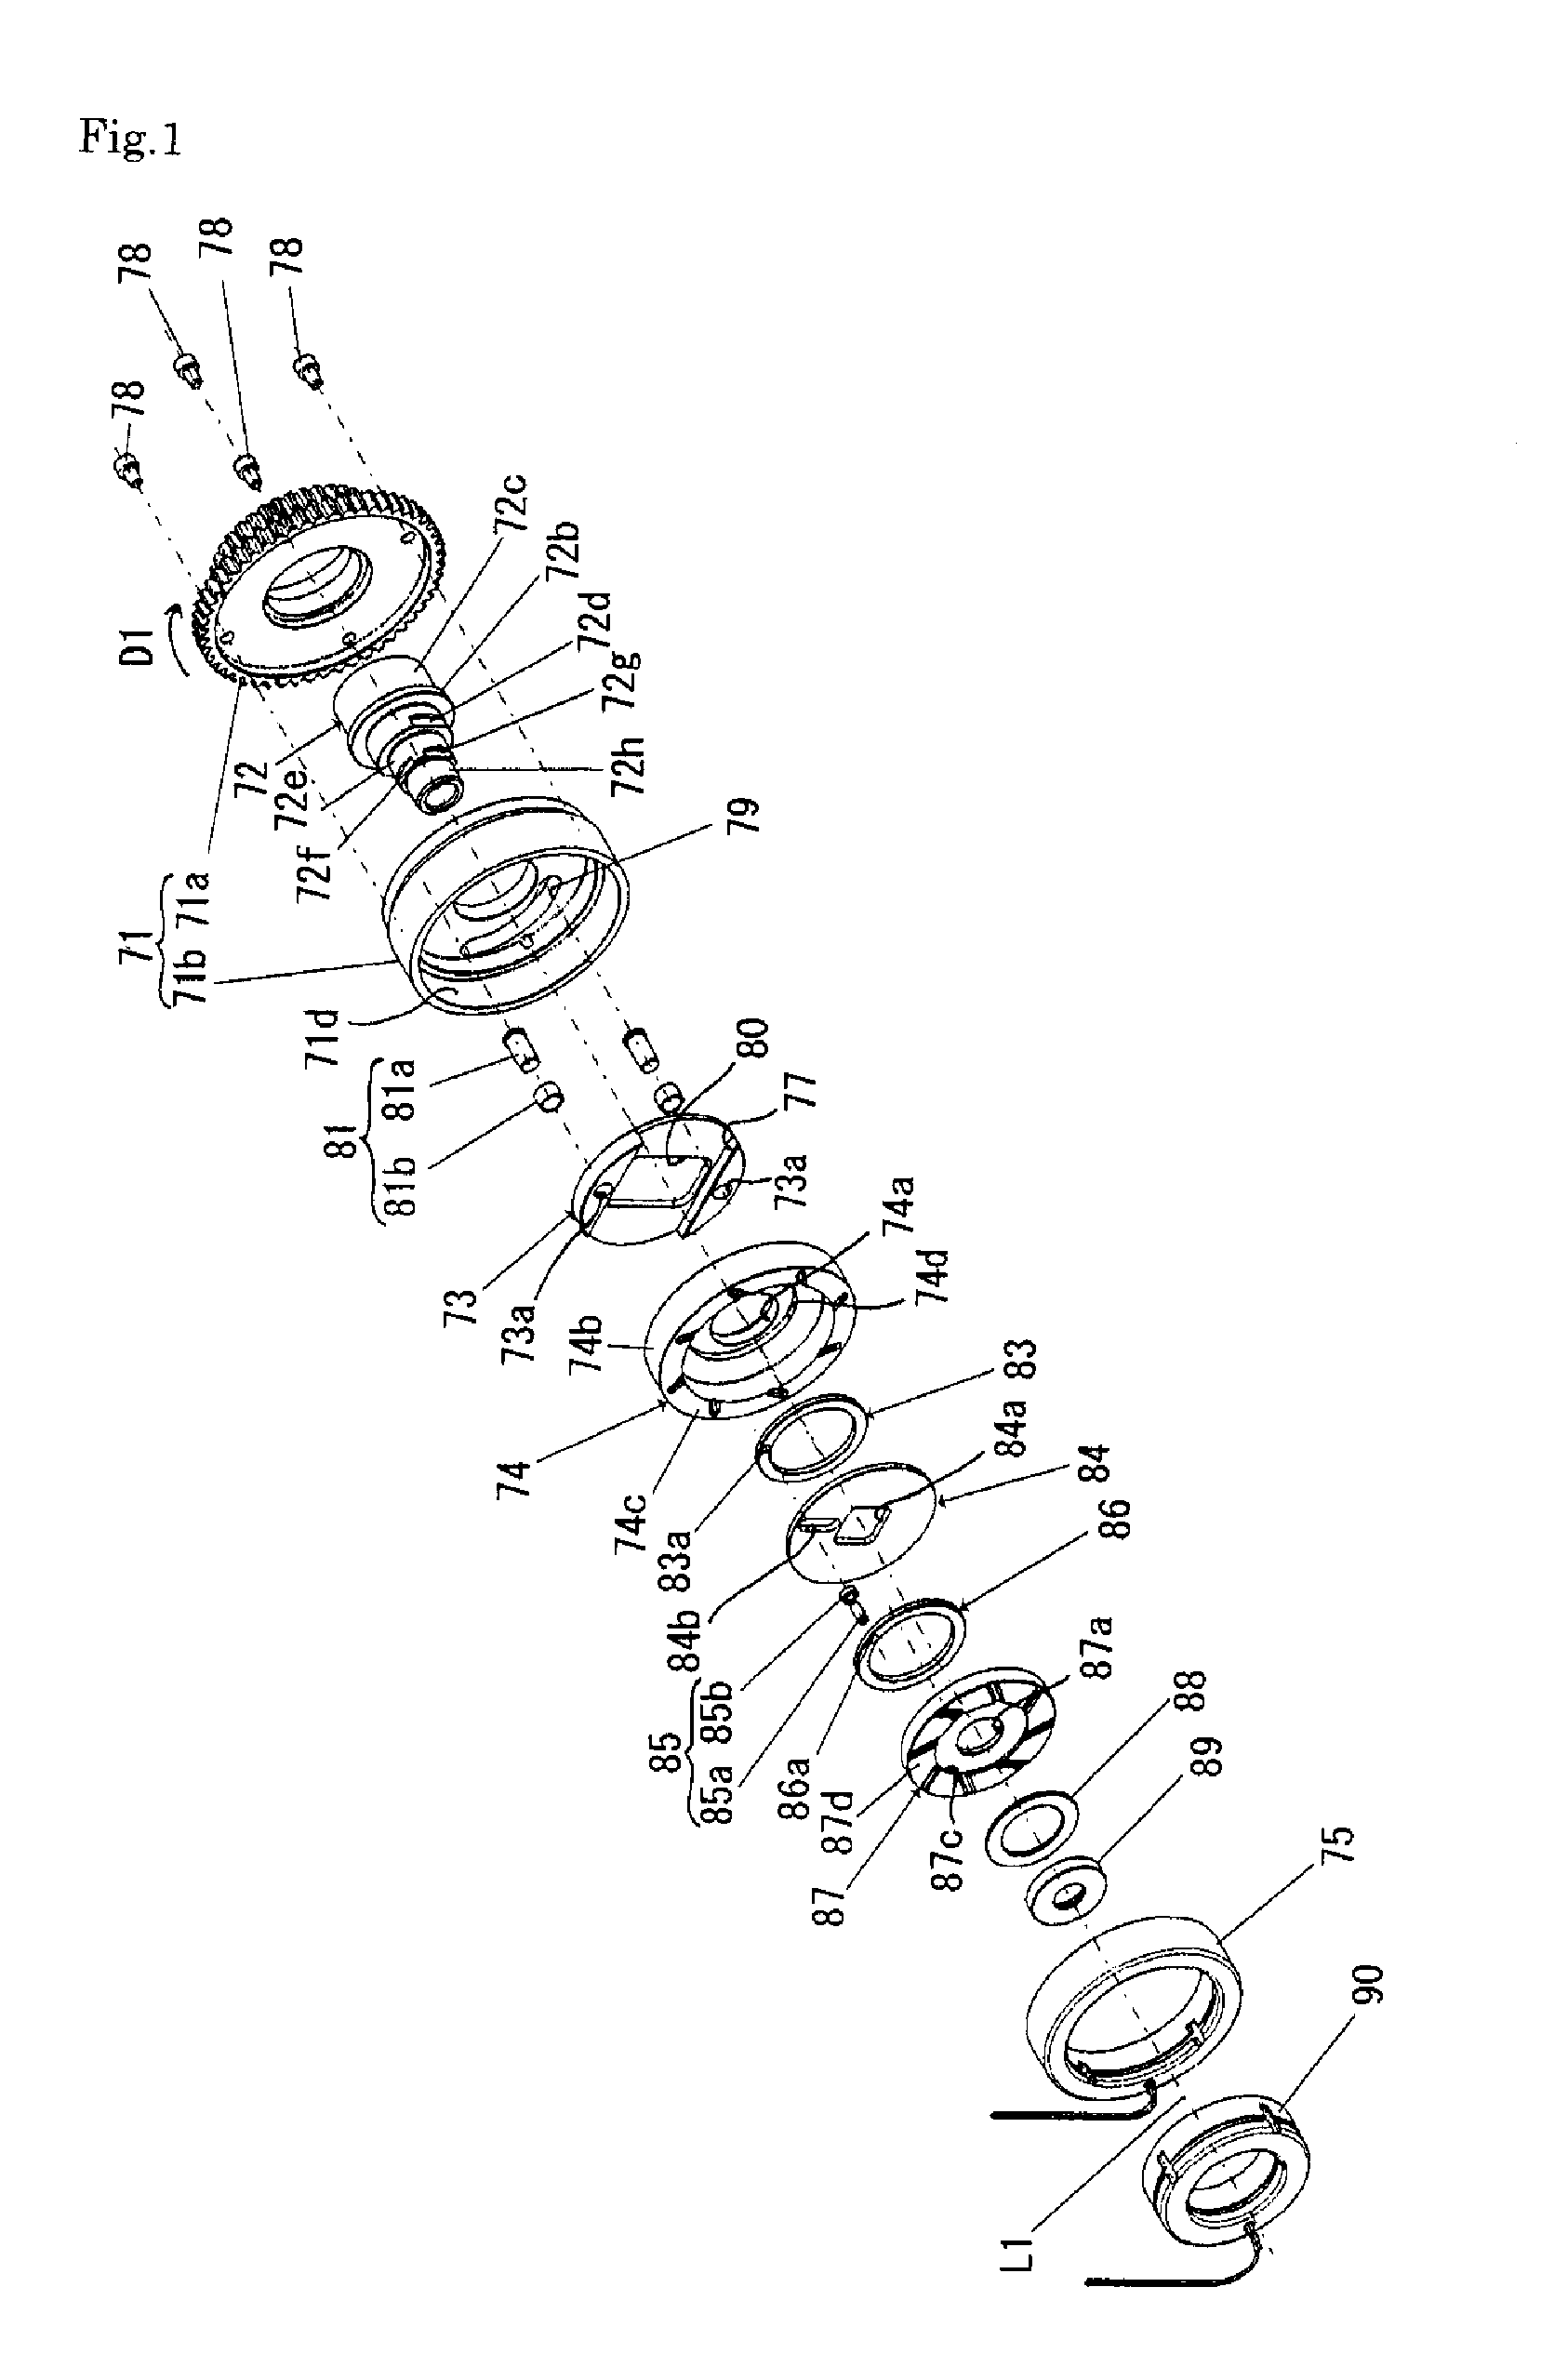 Cam shaft phase variable device in engine for automobile